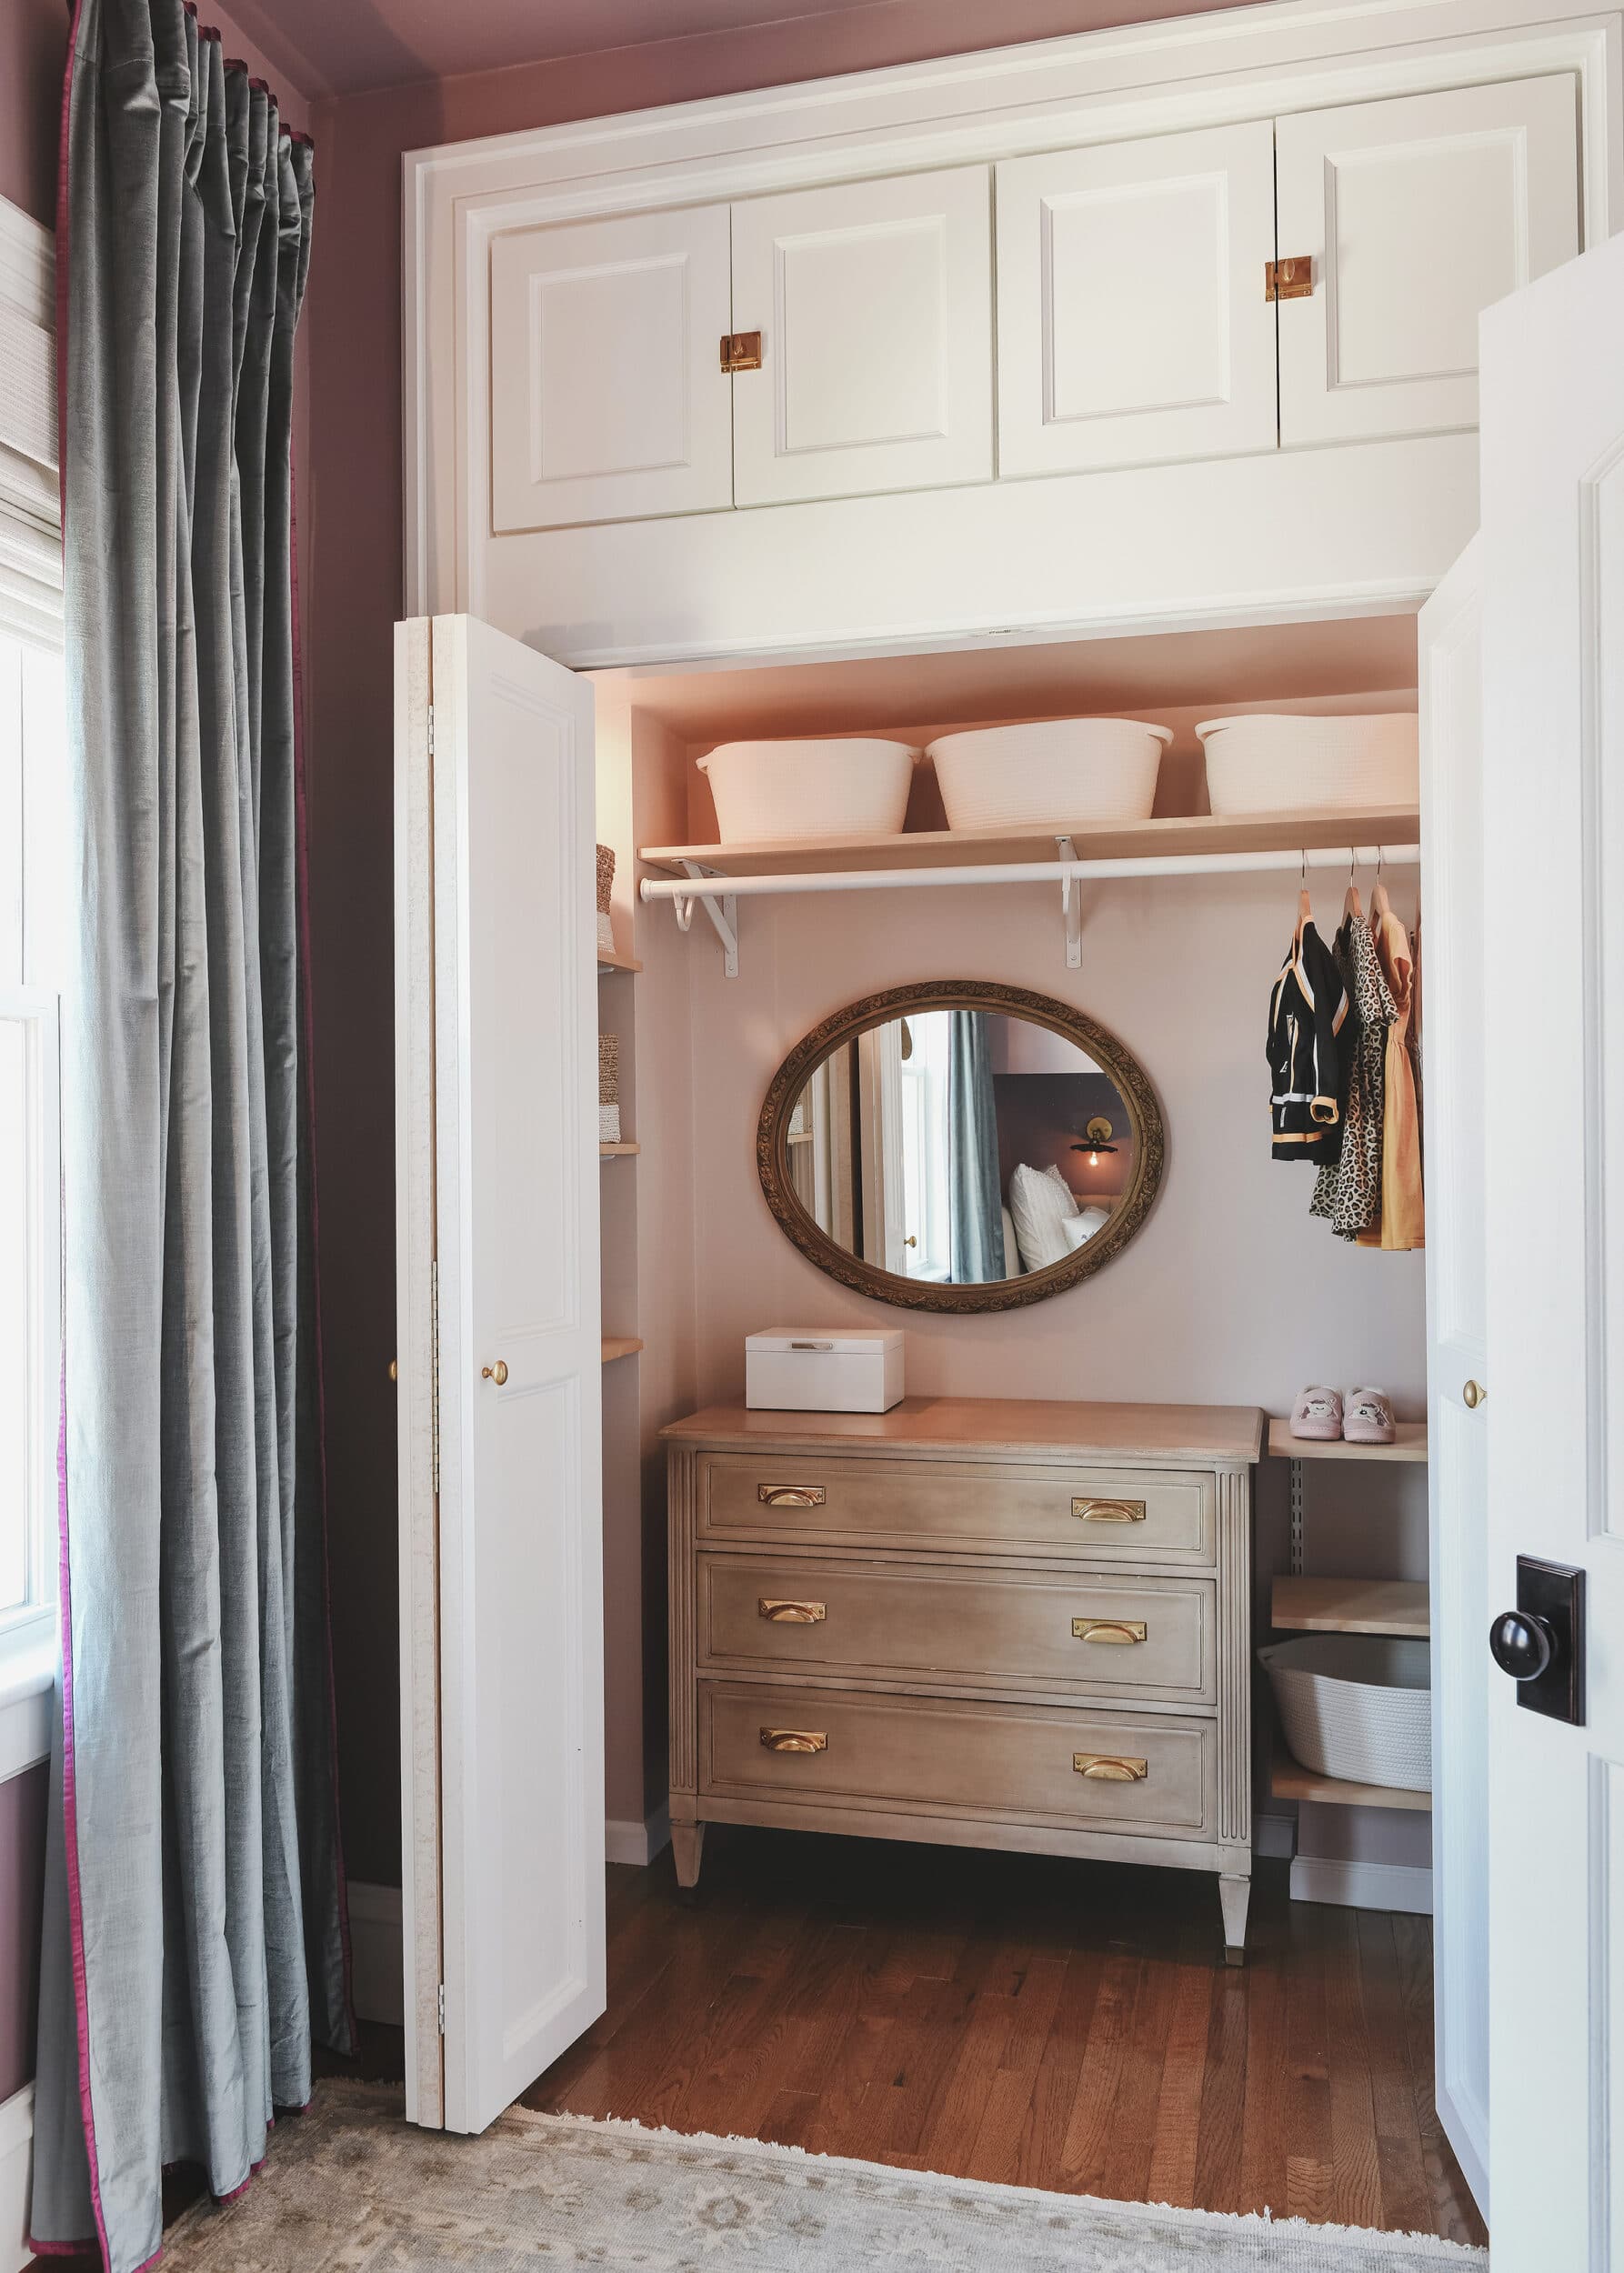 Pink bedroom closet with dresser inside | purple and unicorn bedroom for a big kid via Yellow Brick Home